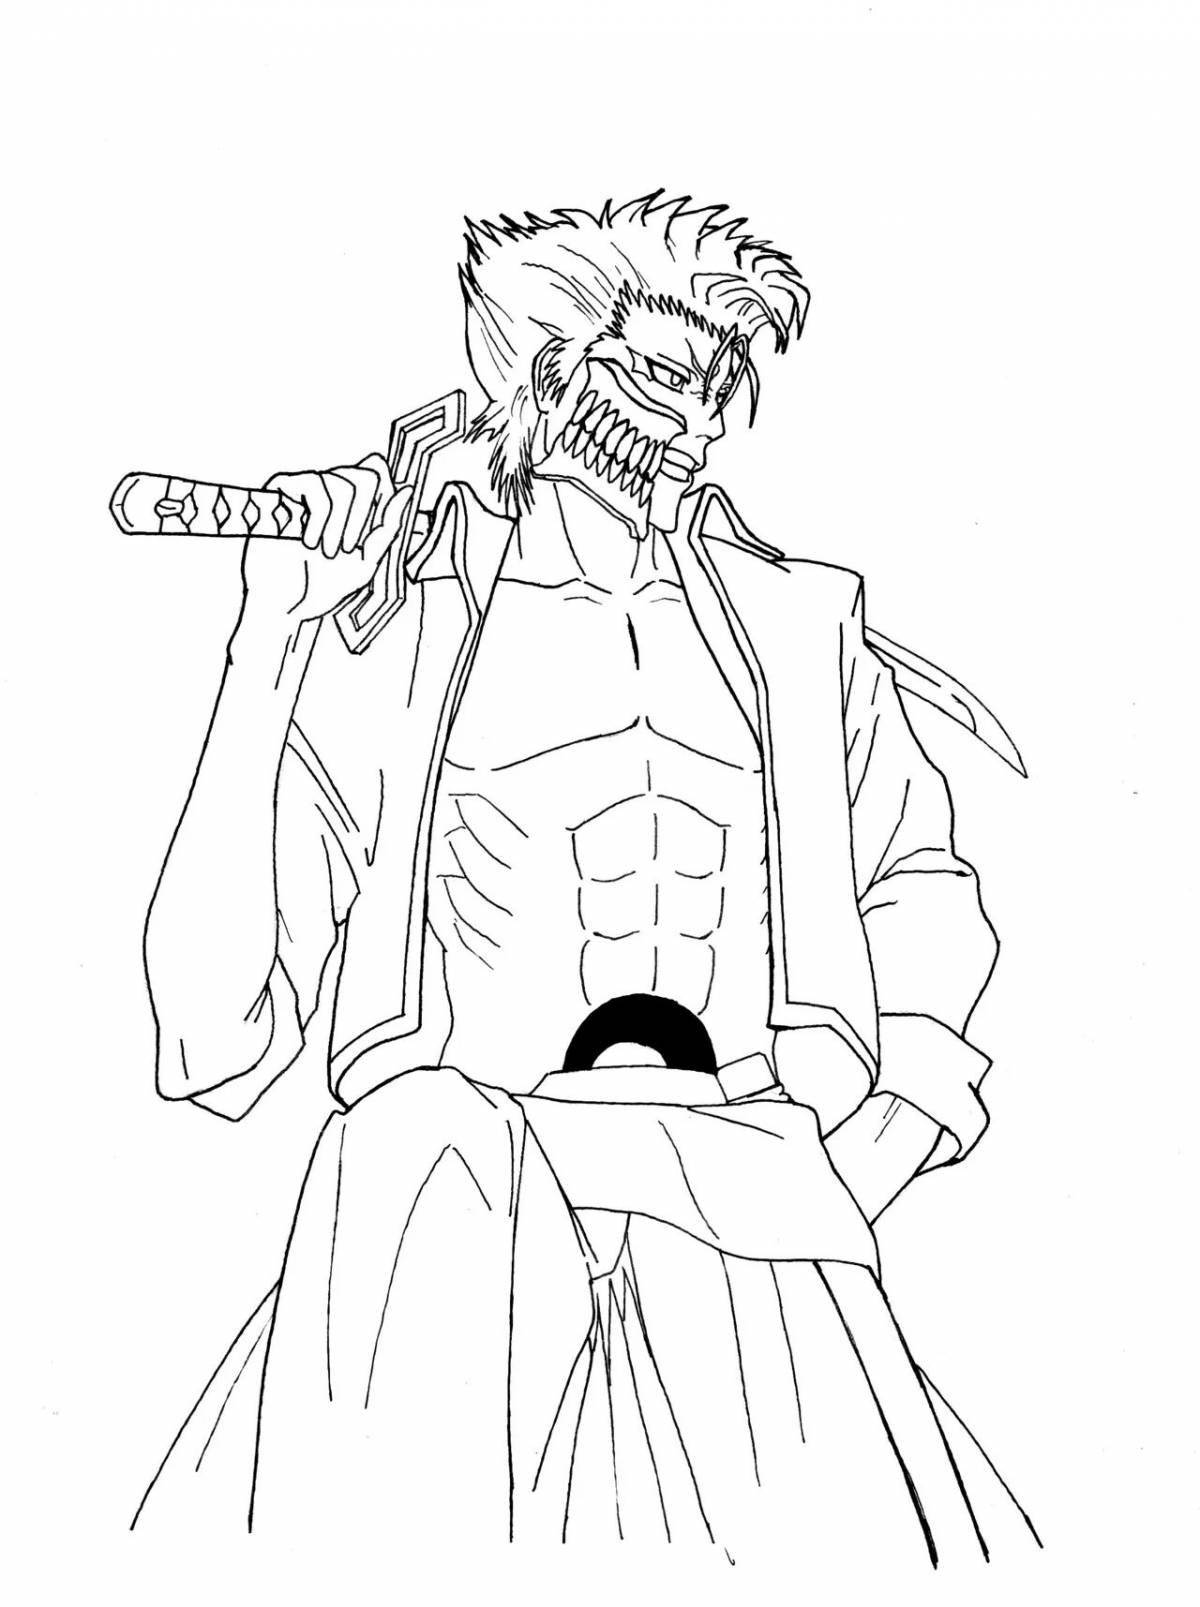 Charming bleach anime coloring book